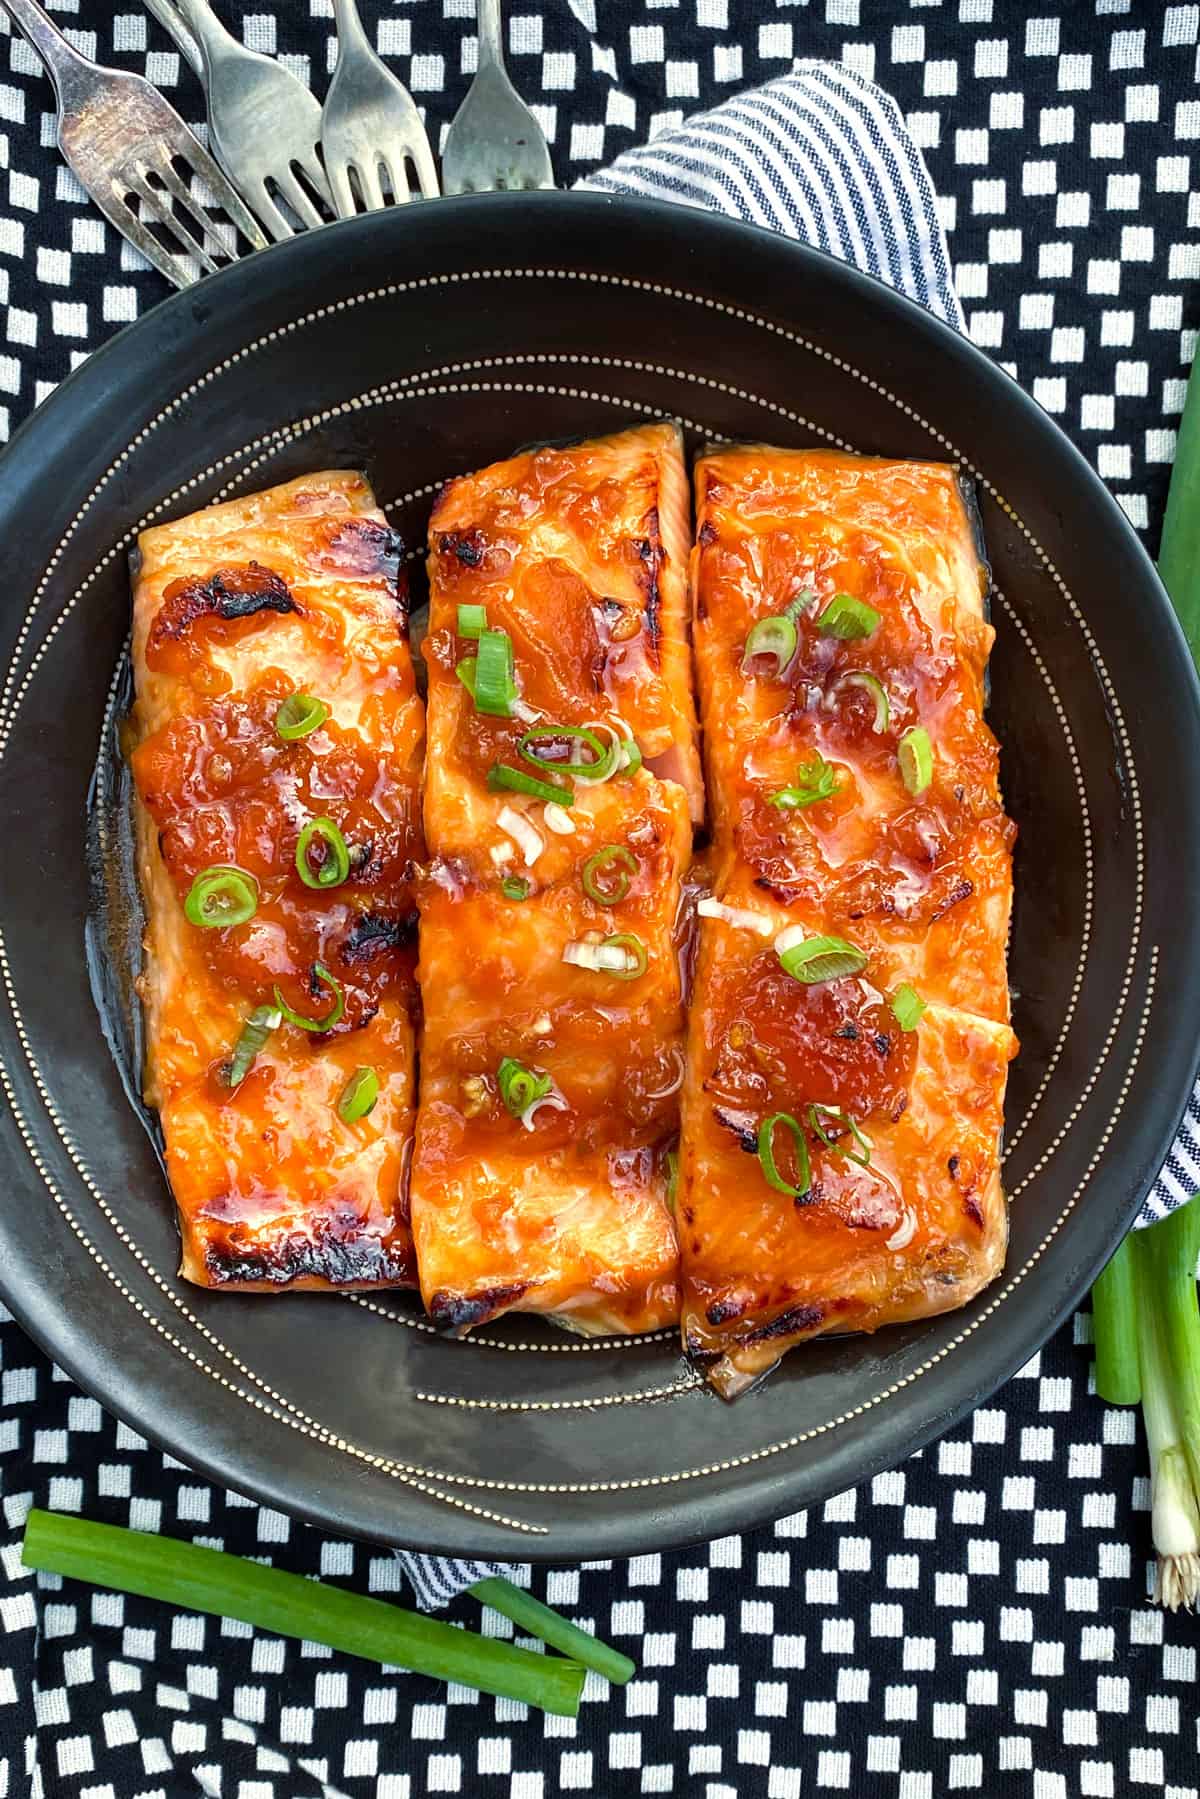 overhead shot of 3 pieces of apricot-glazed, broiled salmon in a black bowl, topped with chopped scallions, all on a vivid black and white table cloth